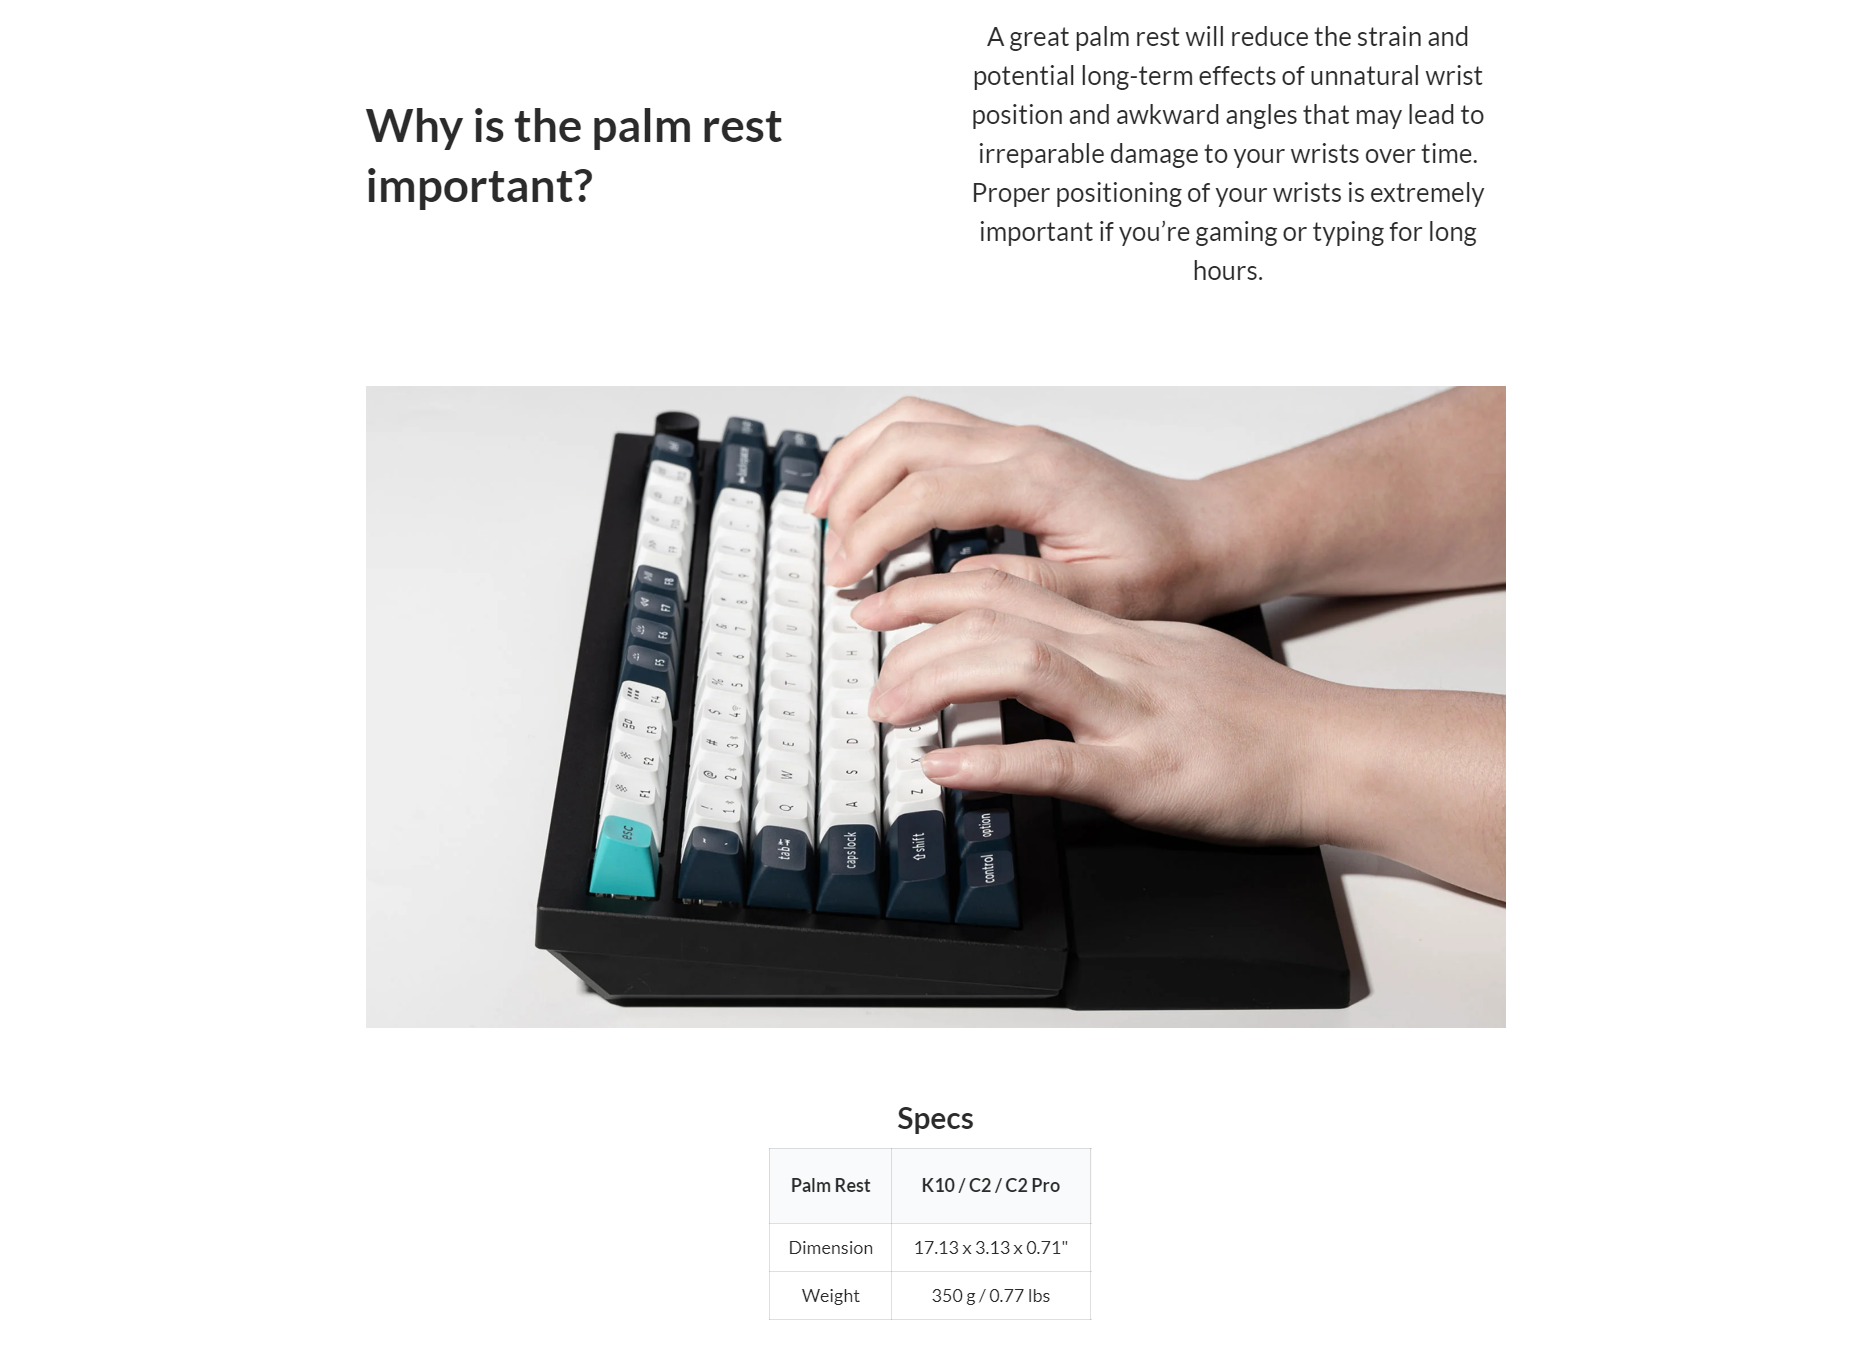 A large marketing image providing additional information about the product Keychron PR48 Silicone Palm Rest - Additional alt info not provided